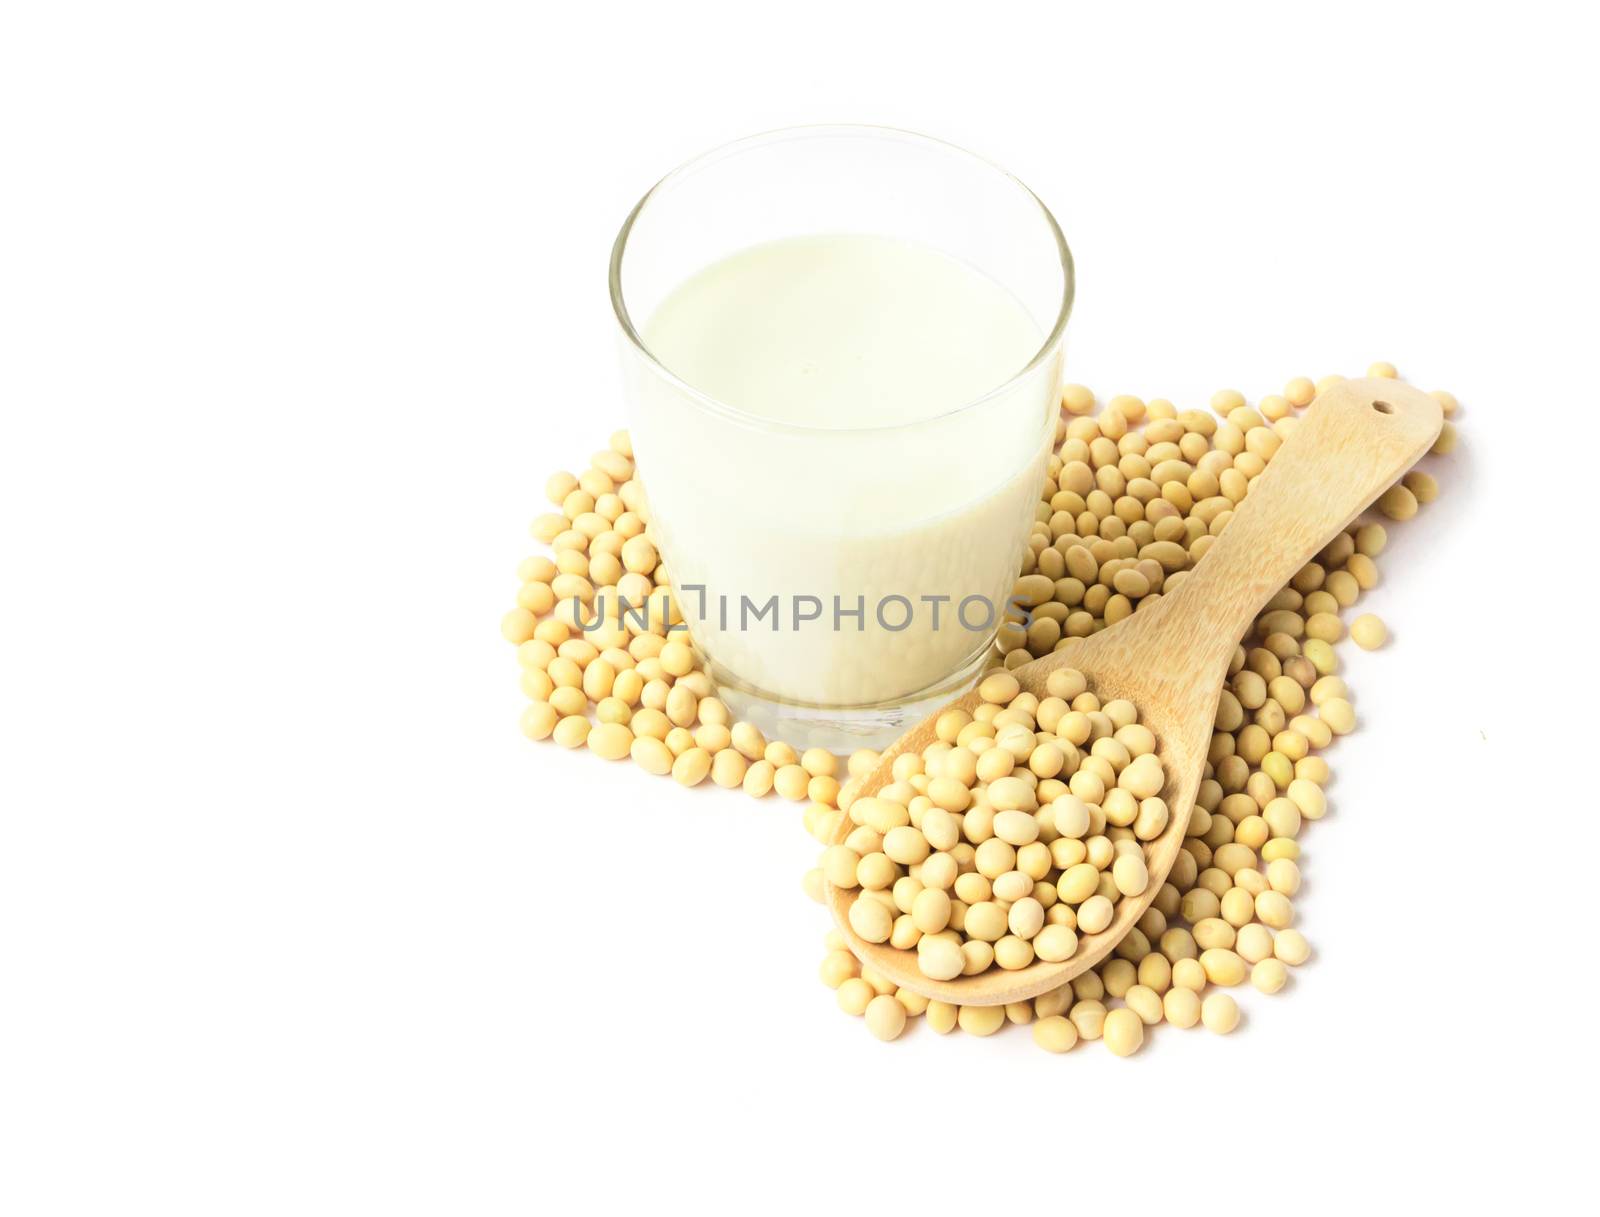 Glass soy milk and soy beans with heart shape on white background, food and drink healthy concept